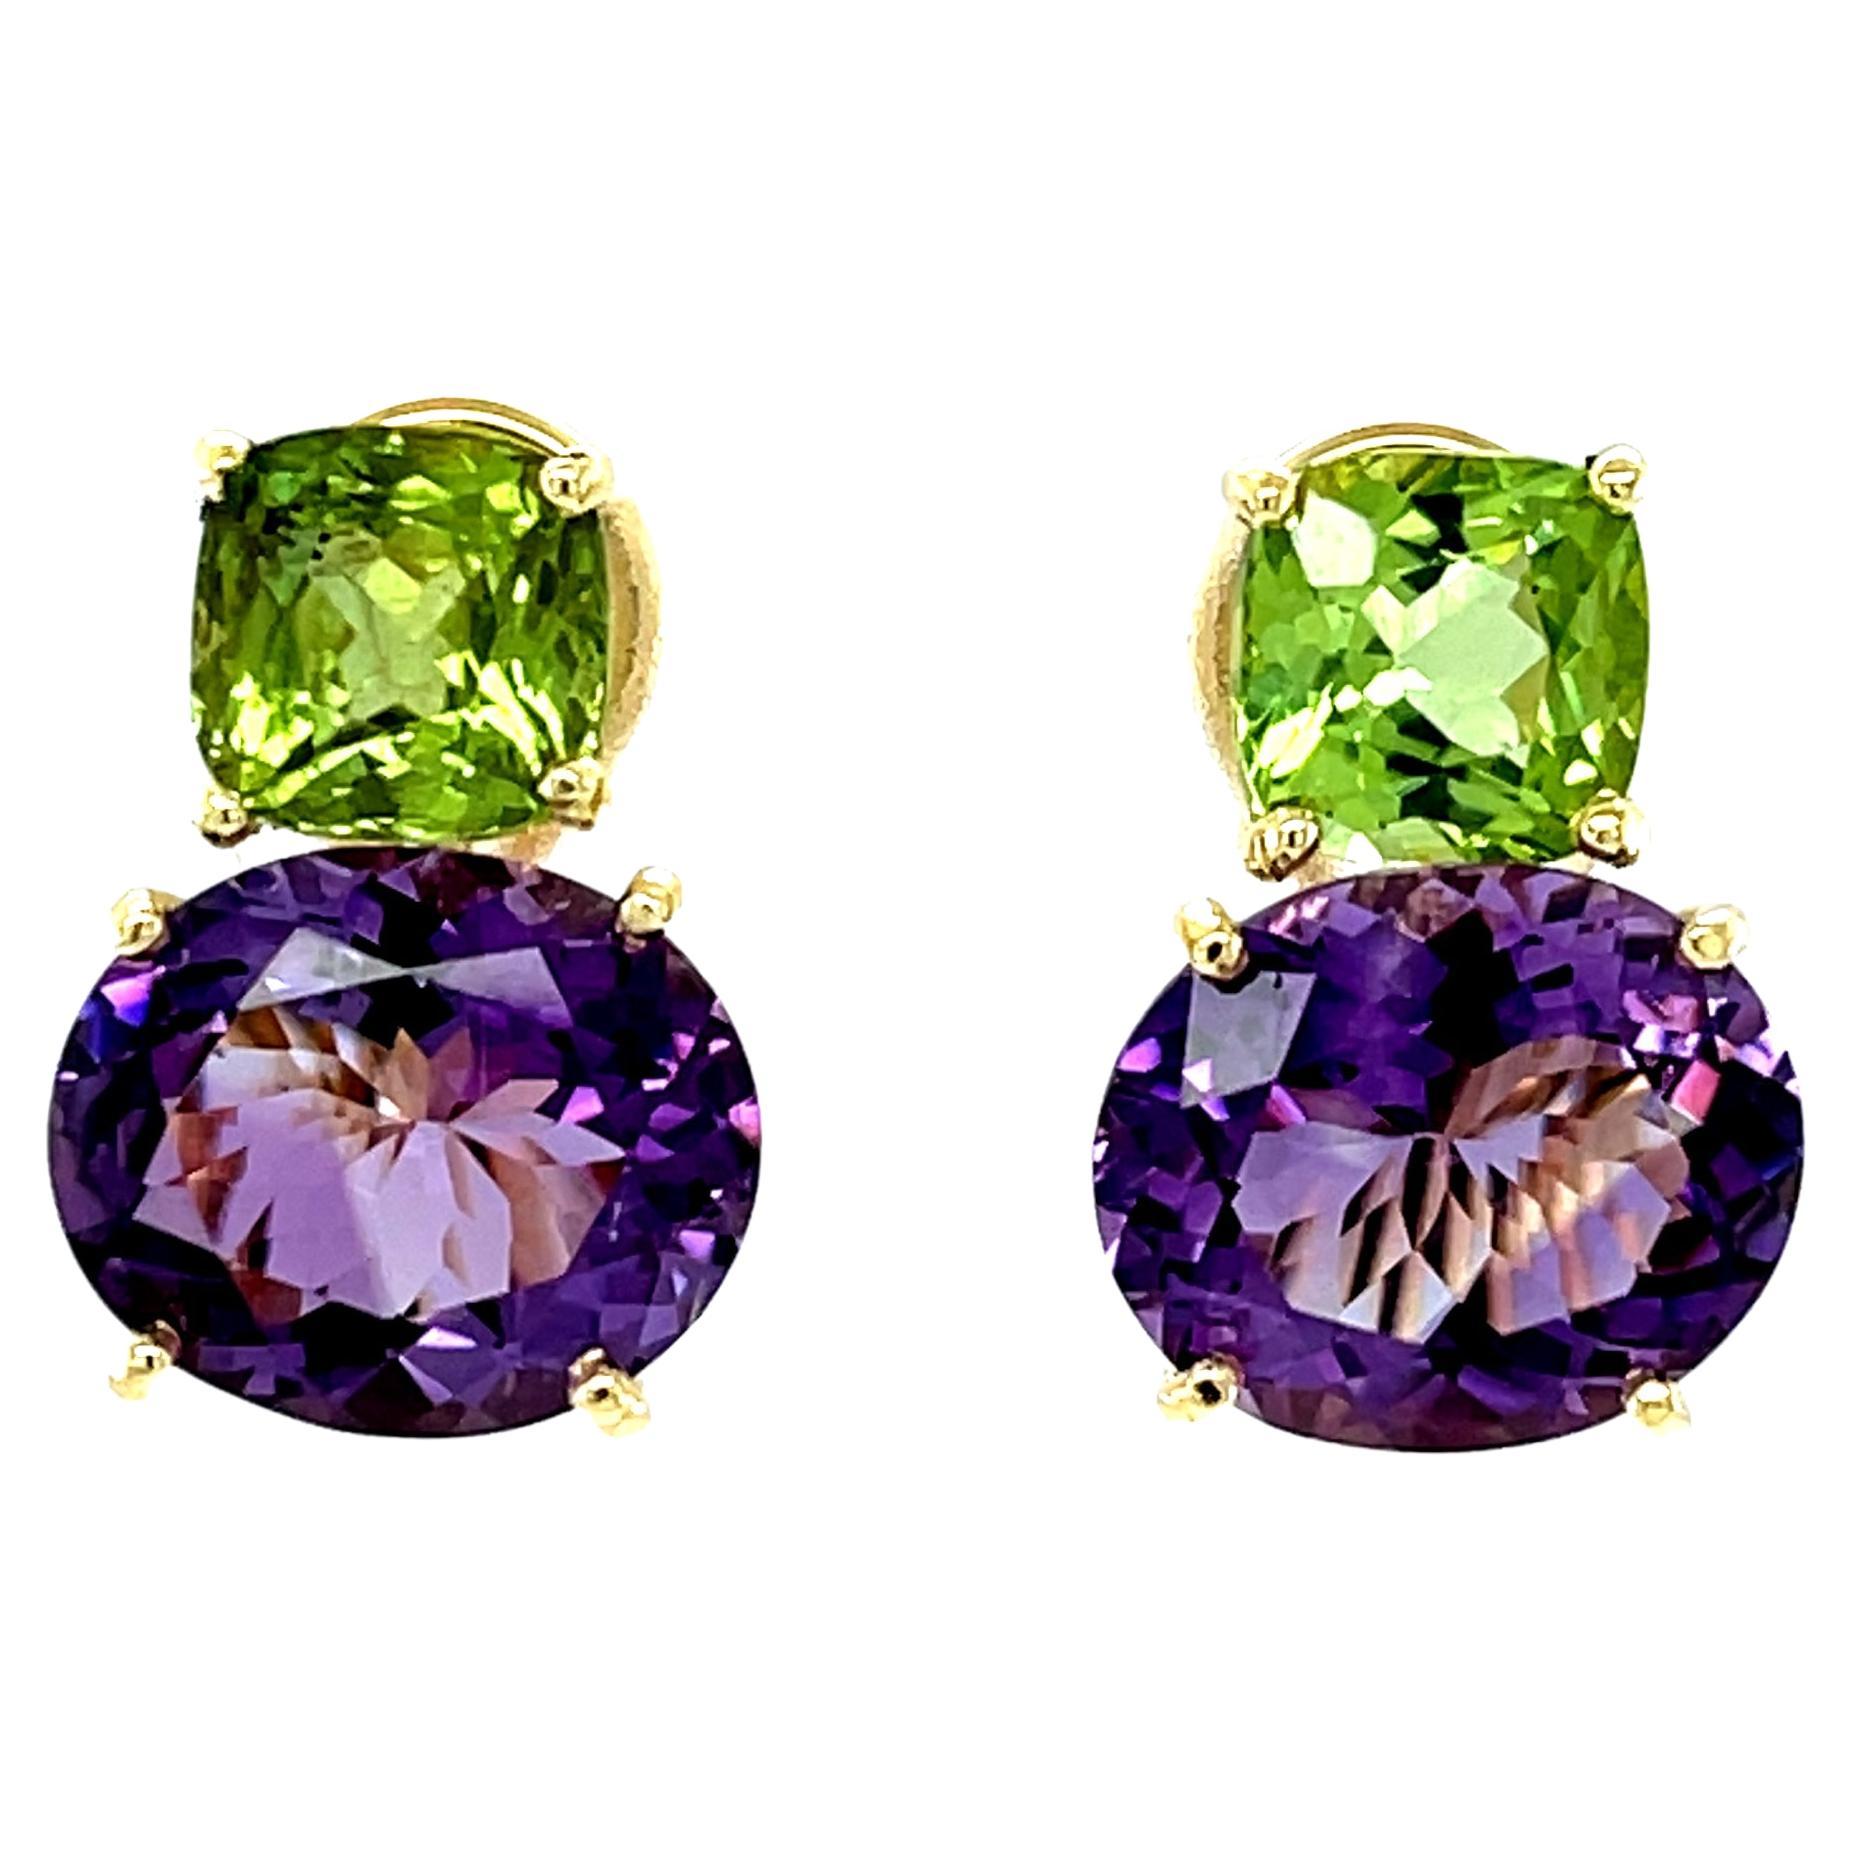 Peridot and Amethyst Earrings in 18k Yellow Gold with French Backs For Sale